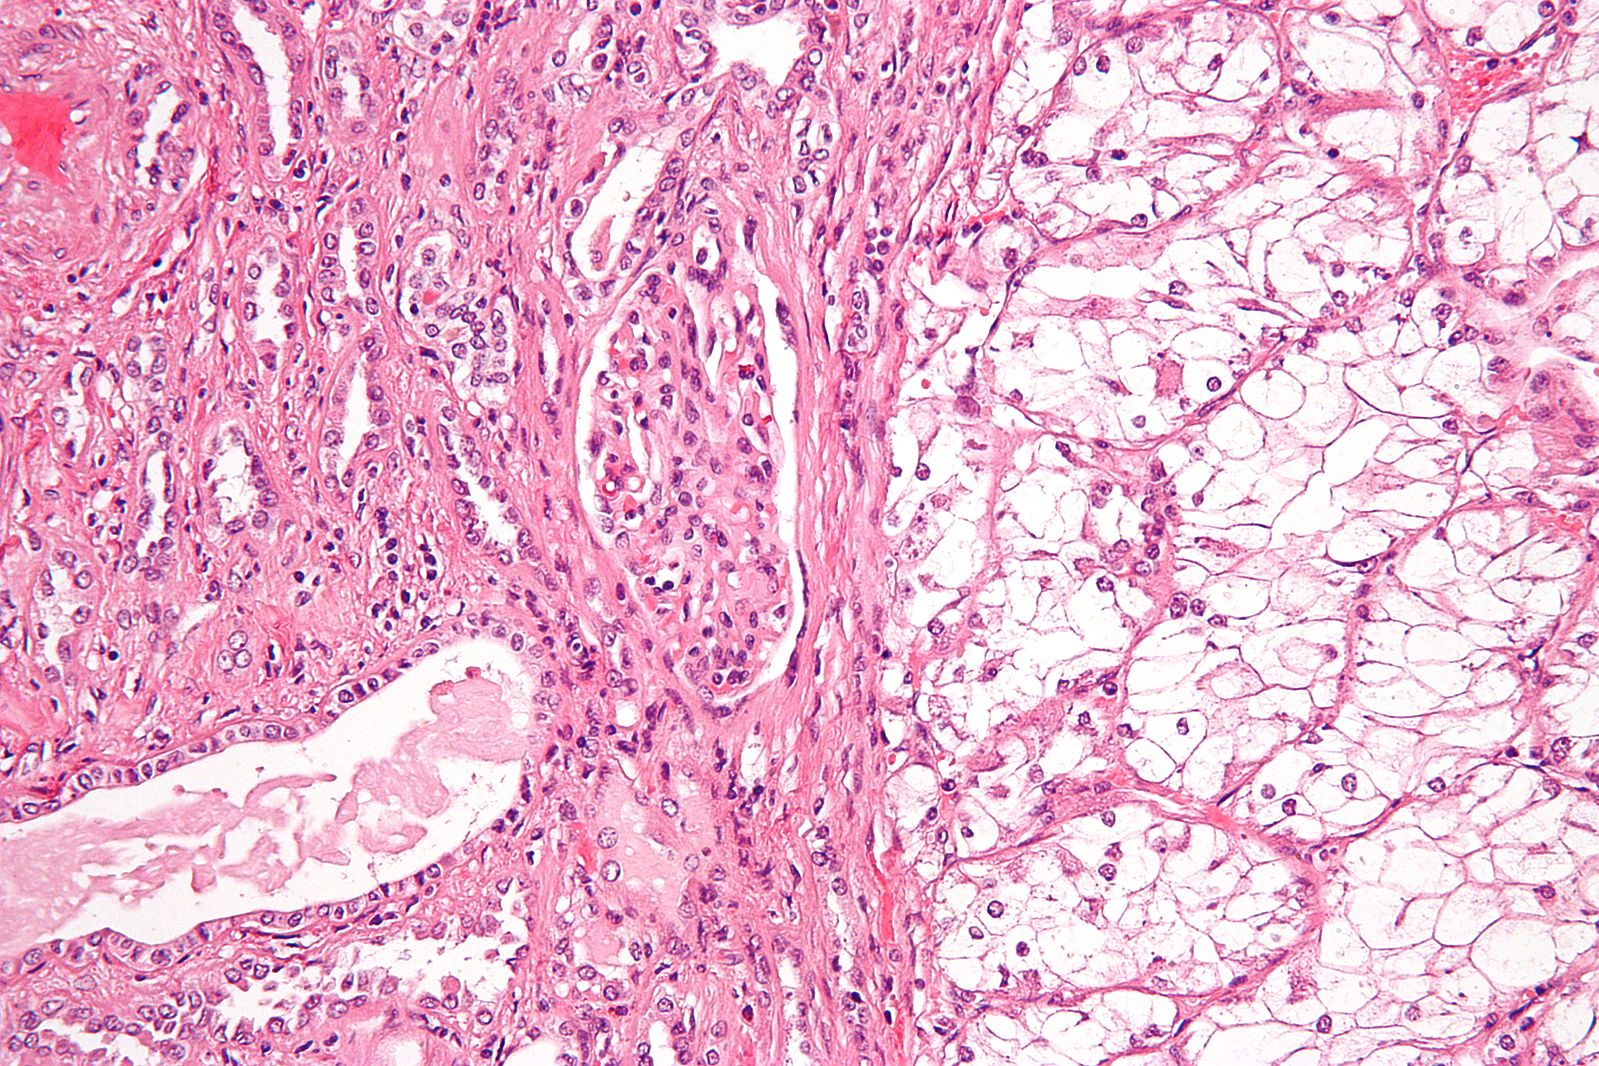 Histologic appearance of clear cell carcinoma on the right; normal kidney tubules are on the left. 